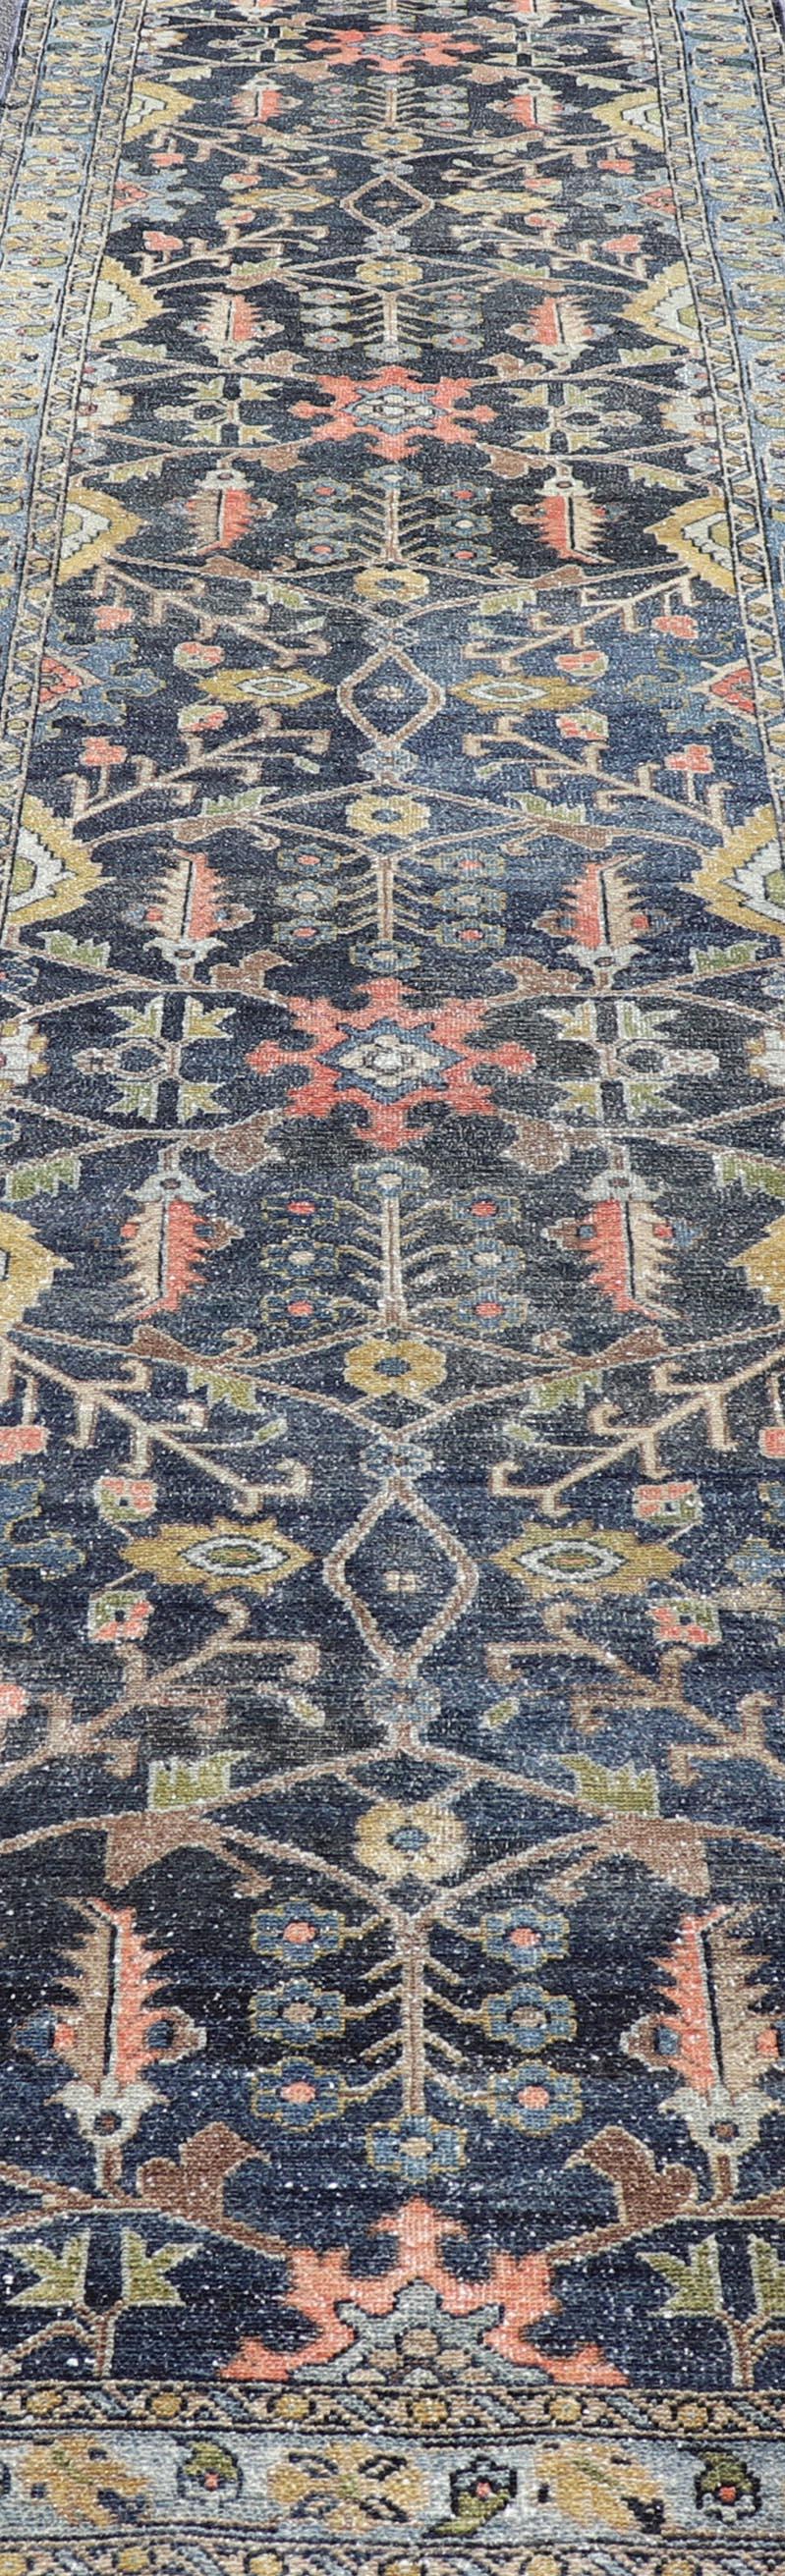 Antique Persian Malayer Tribal Runner in Steal Gray Blue, Green, Gold & Coral  For Sale 2